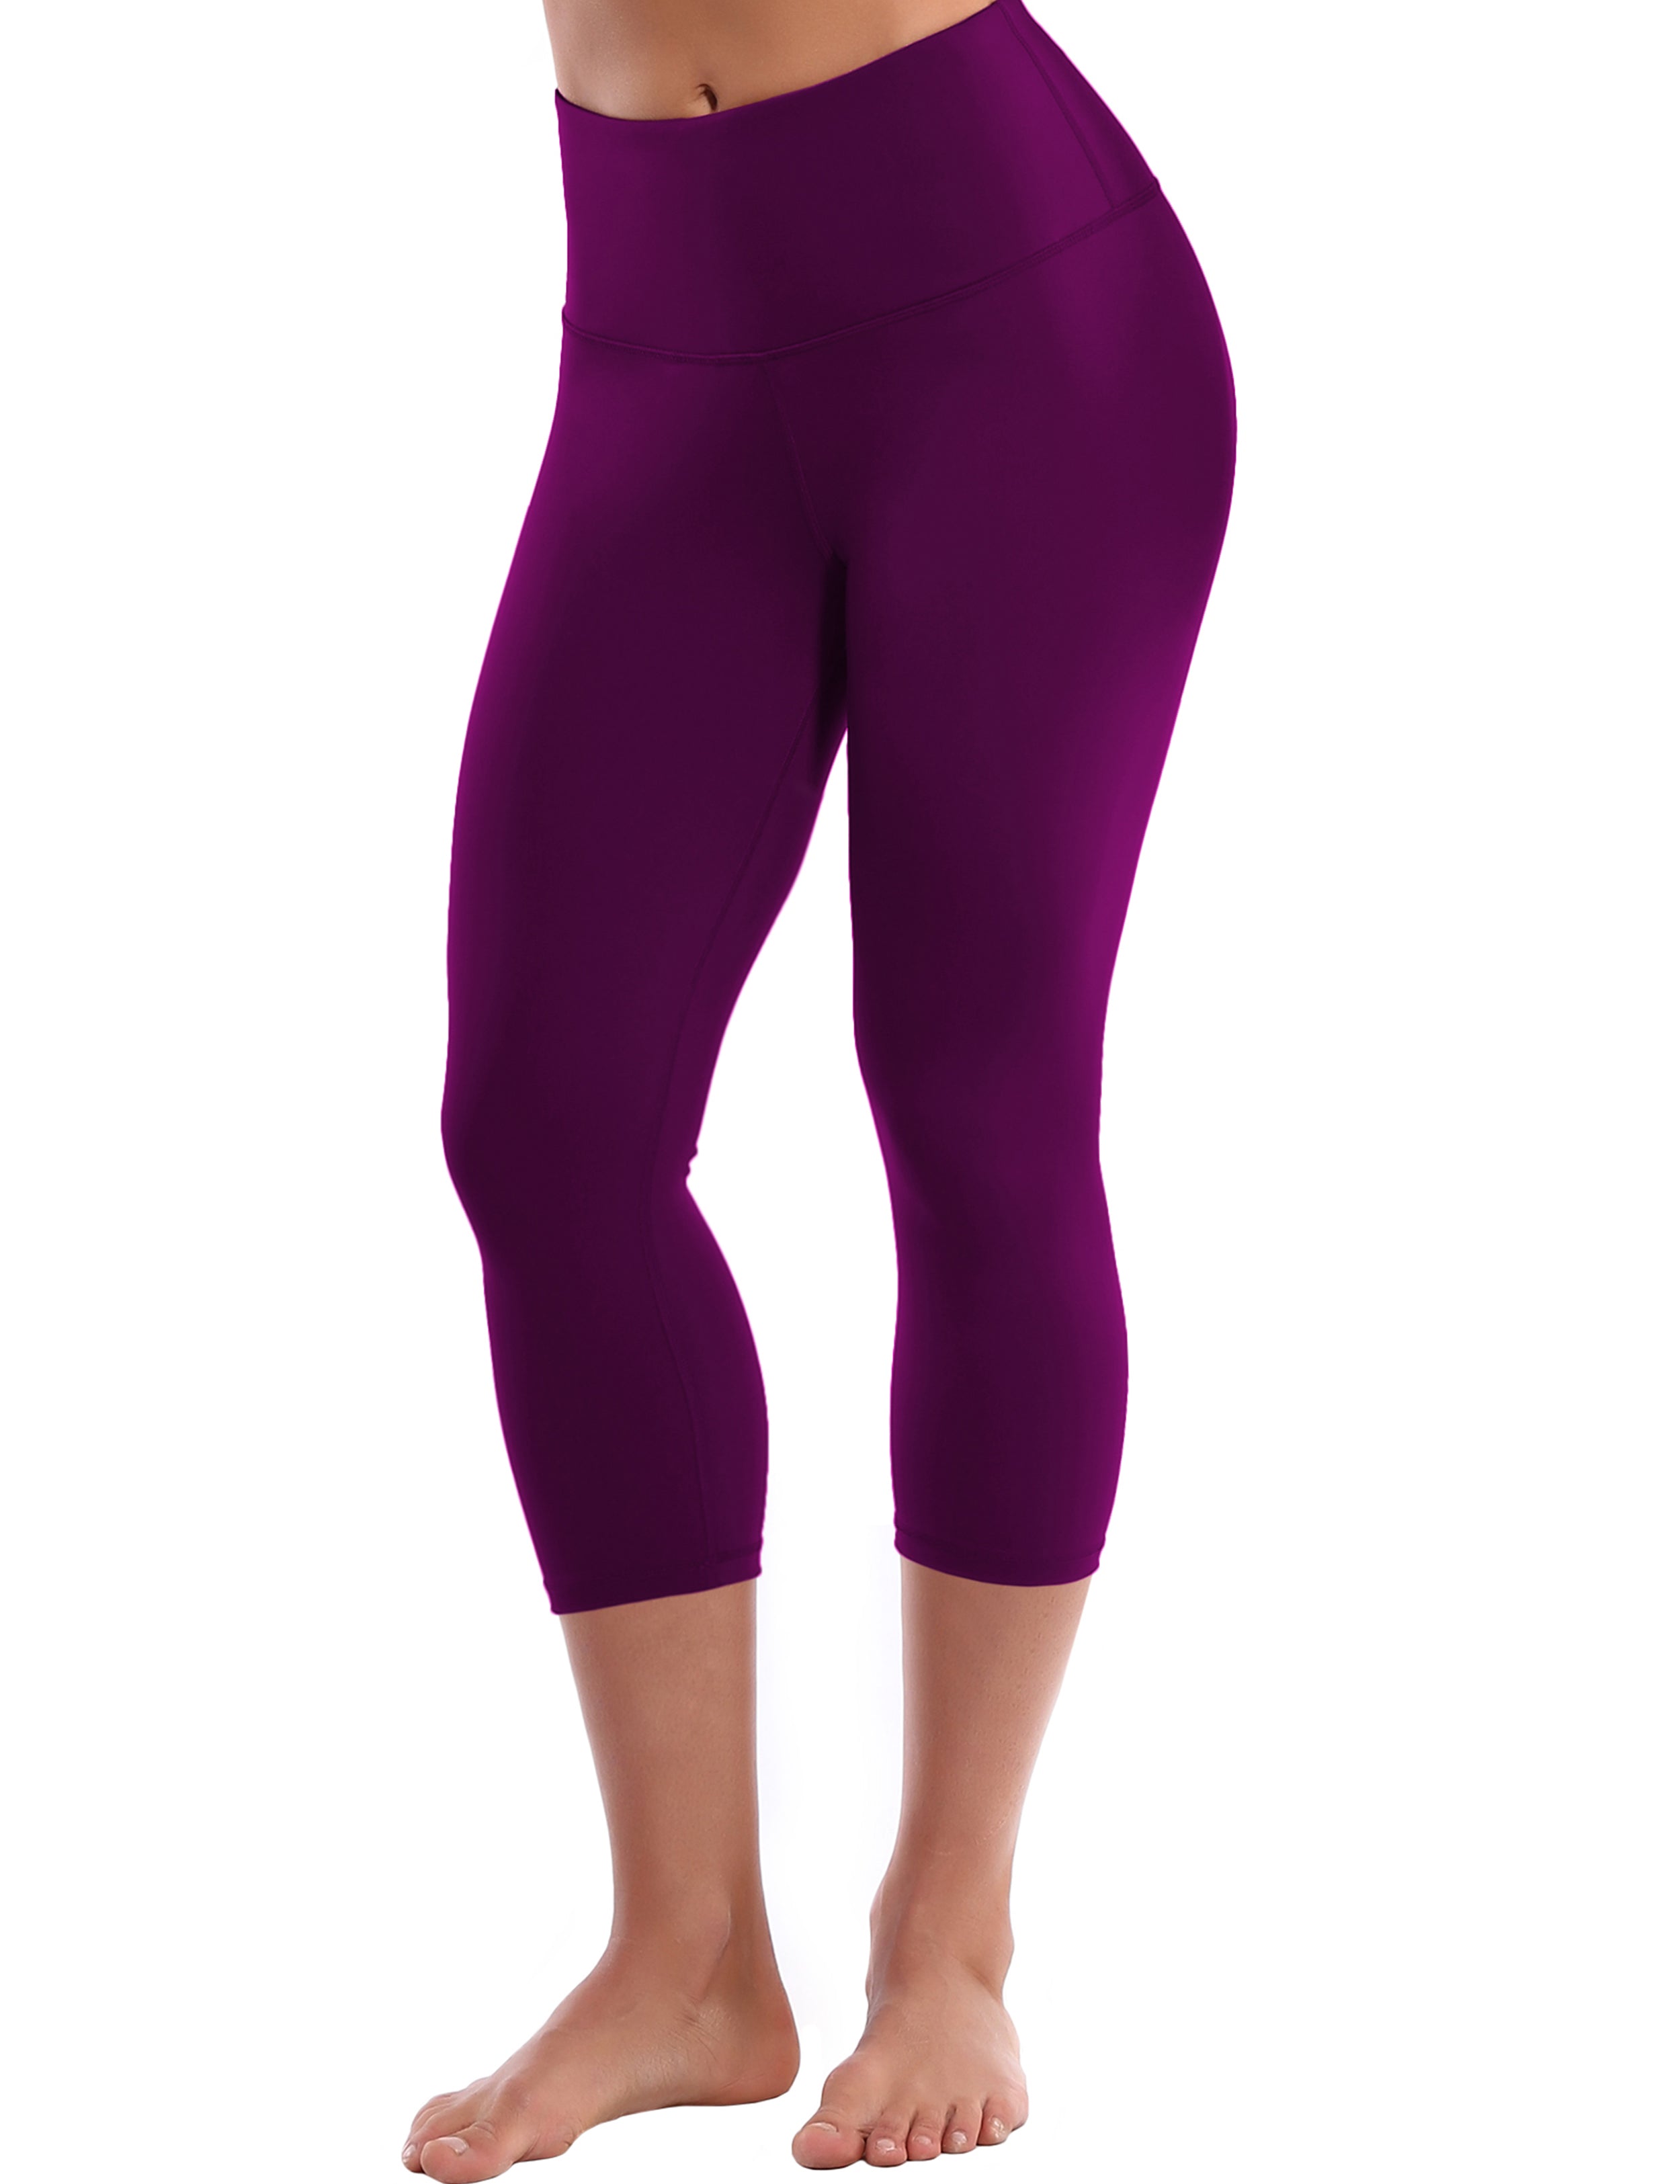 19" High Waist Crop Tight Capris plum 75%Nylon/25%Spandex Fabric doesn't attract lint easily 4-way stretch No see-through Moisture-wicking Tummy control Inner pocket